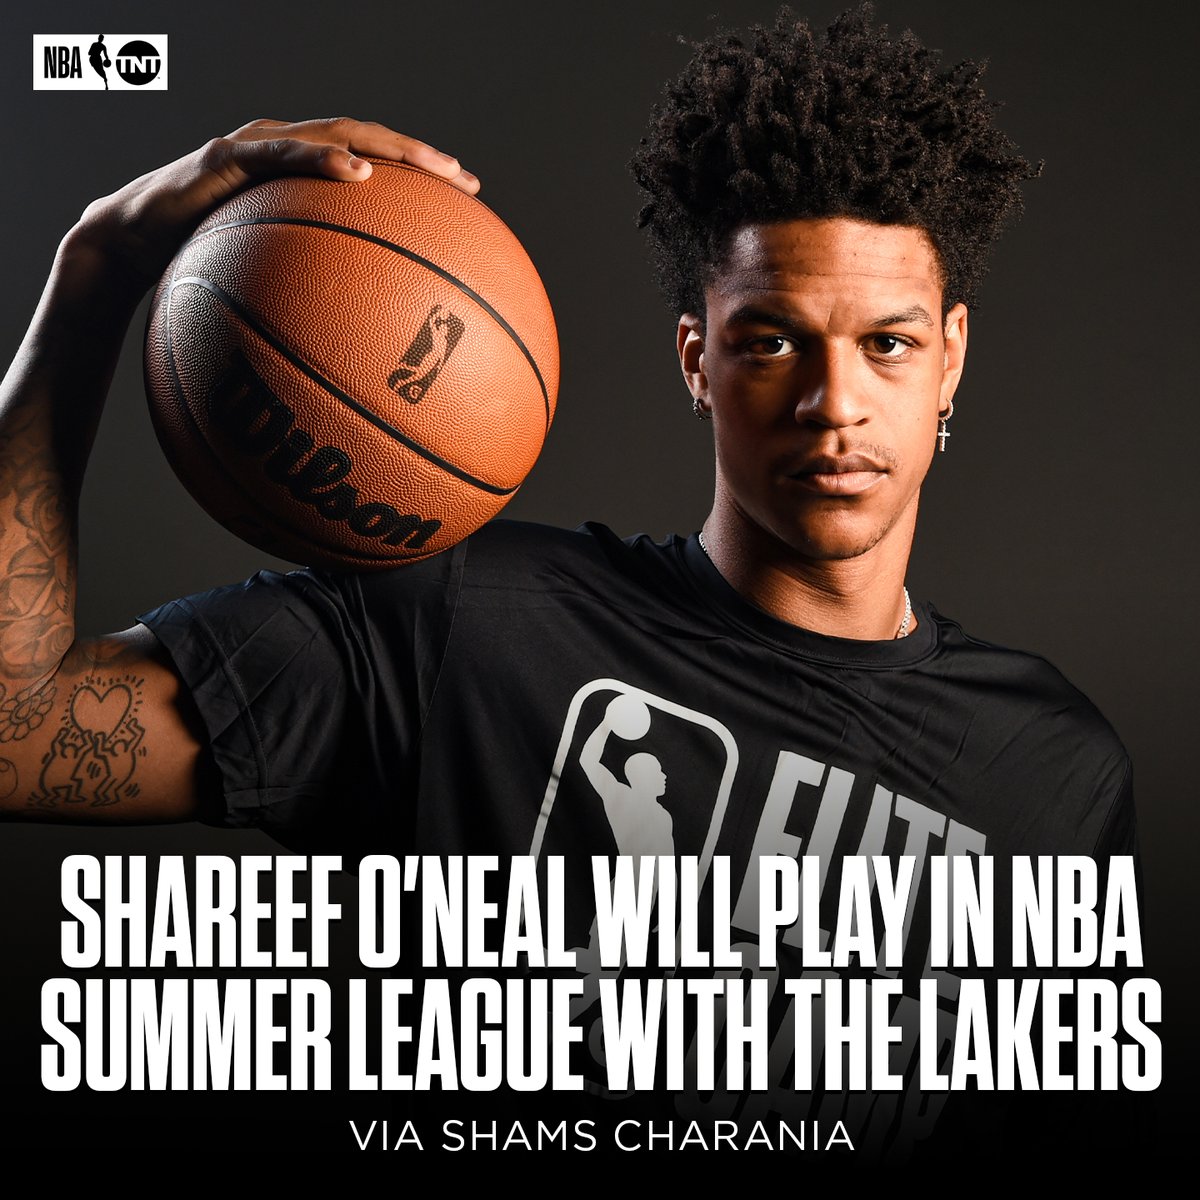 Shareef O'Neal will suit up in the purple and gold for #NBASummerLeague 👀 via @ShamsCharania https://t.co/WjiVU2O5zj